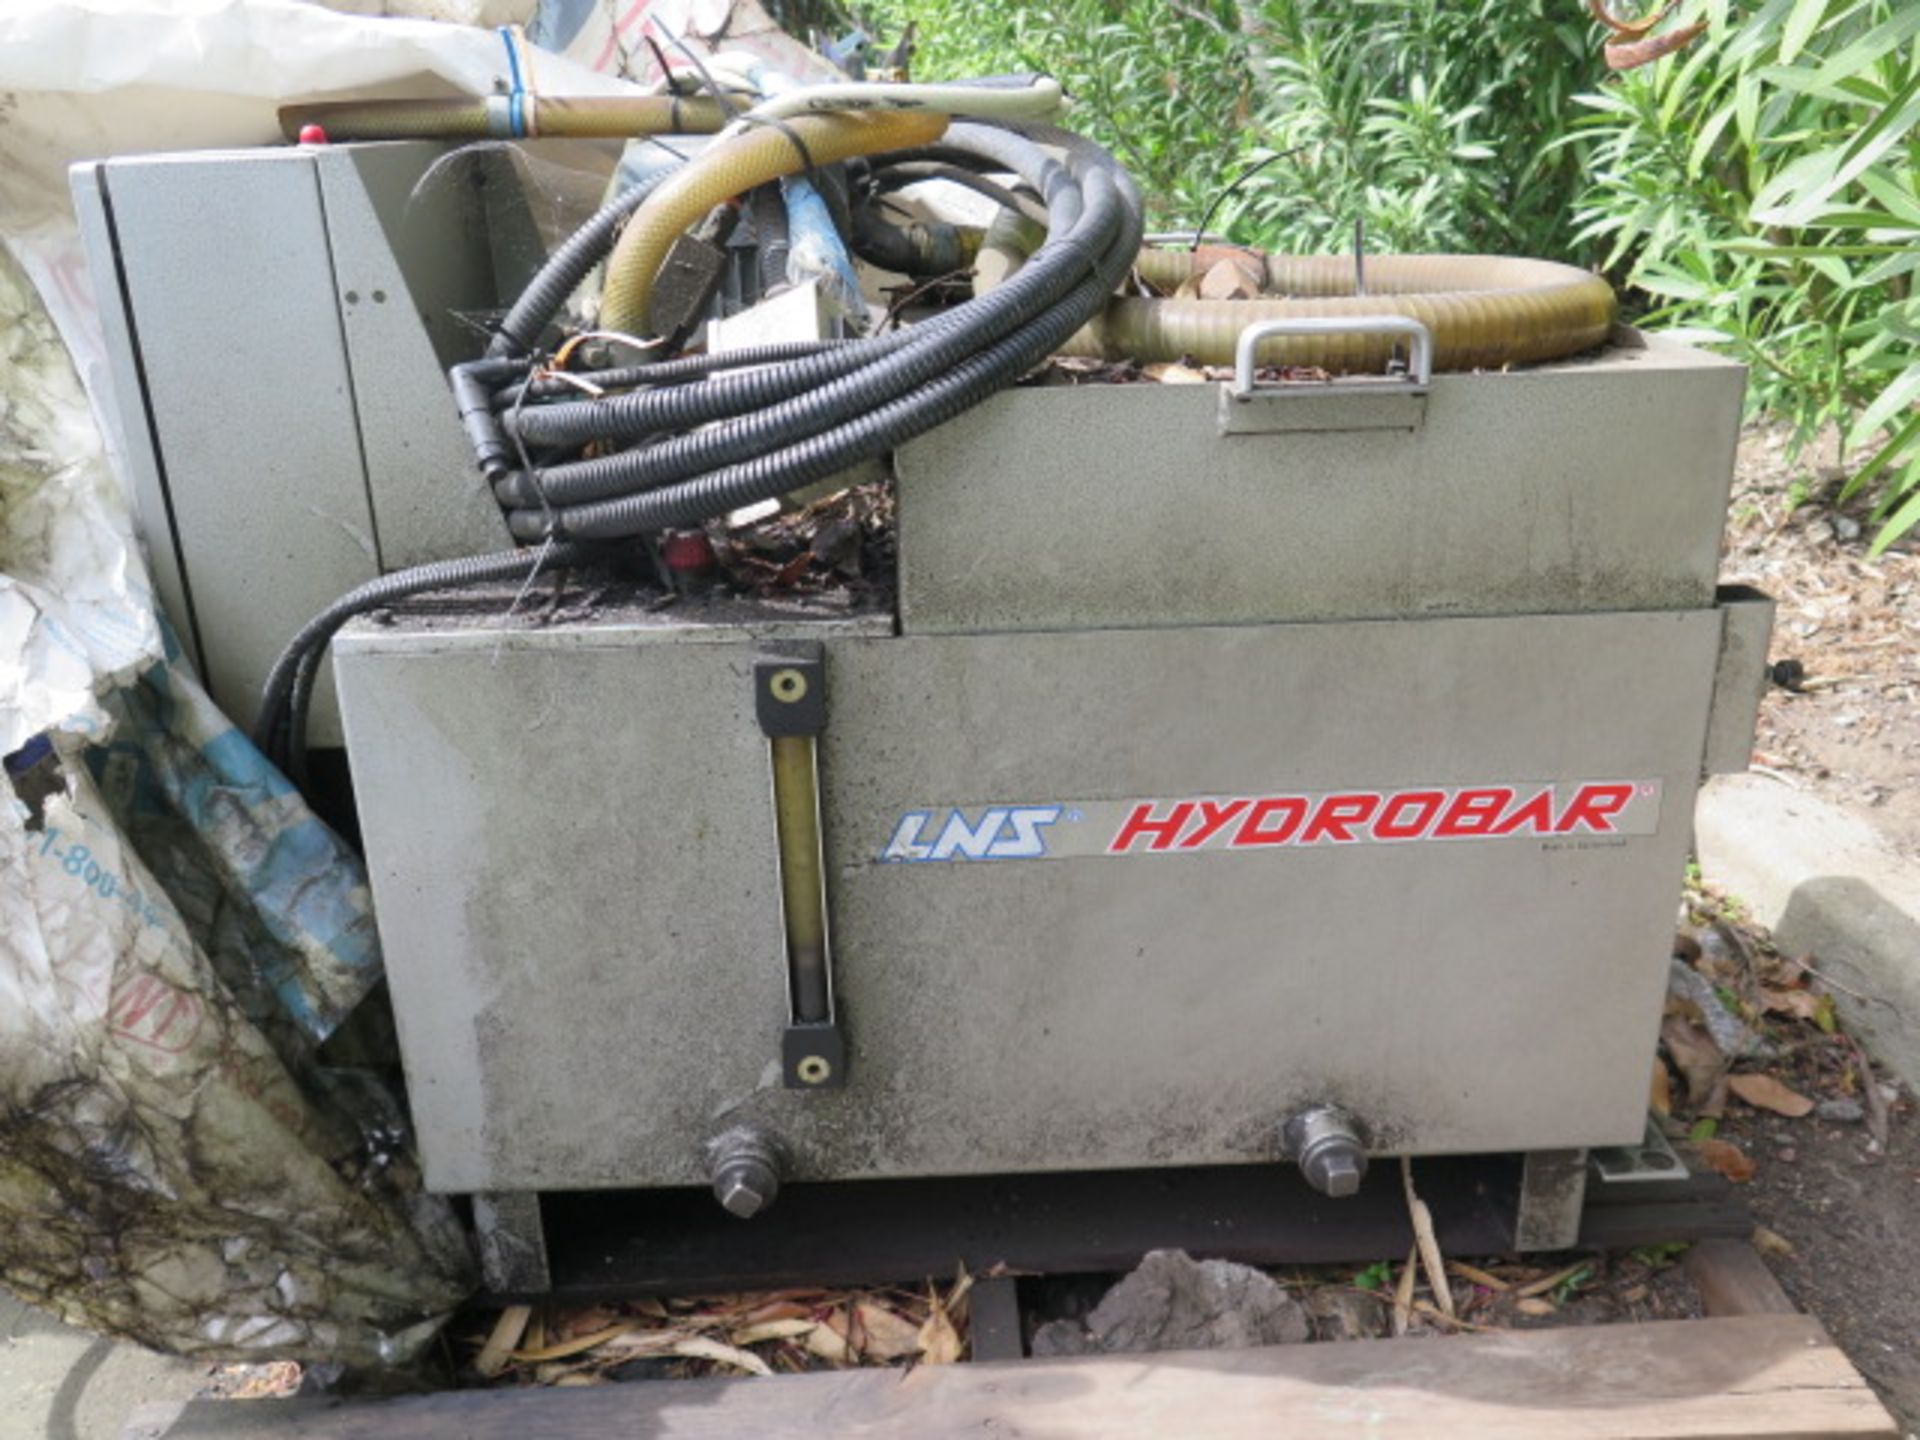 LNS Hydrobar Hydraulic Bar Feed (SOLD AS-IS - NO WARRANTY) (Located at 2091 Fortune Dr., San Jose) - Image 3 of 8